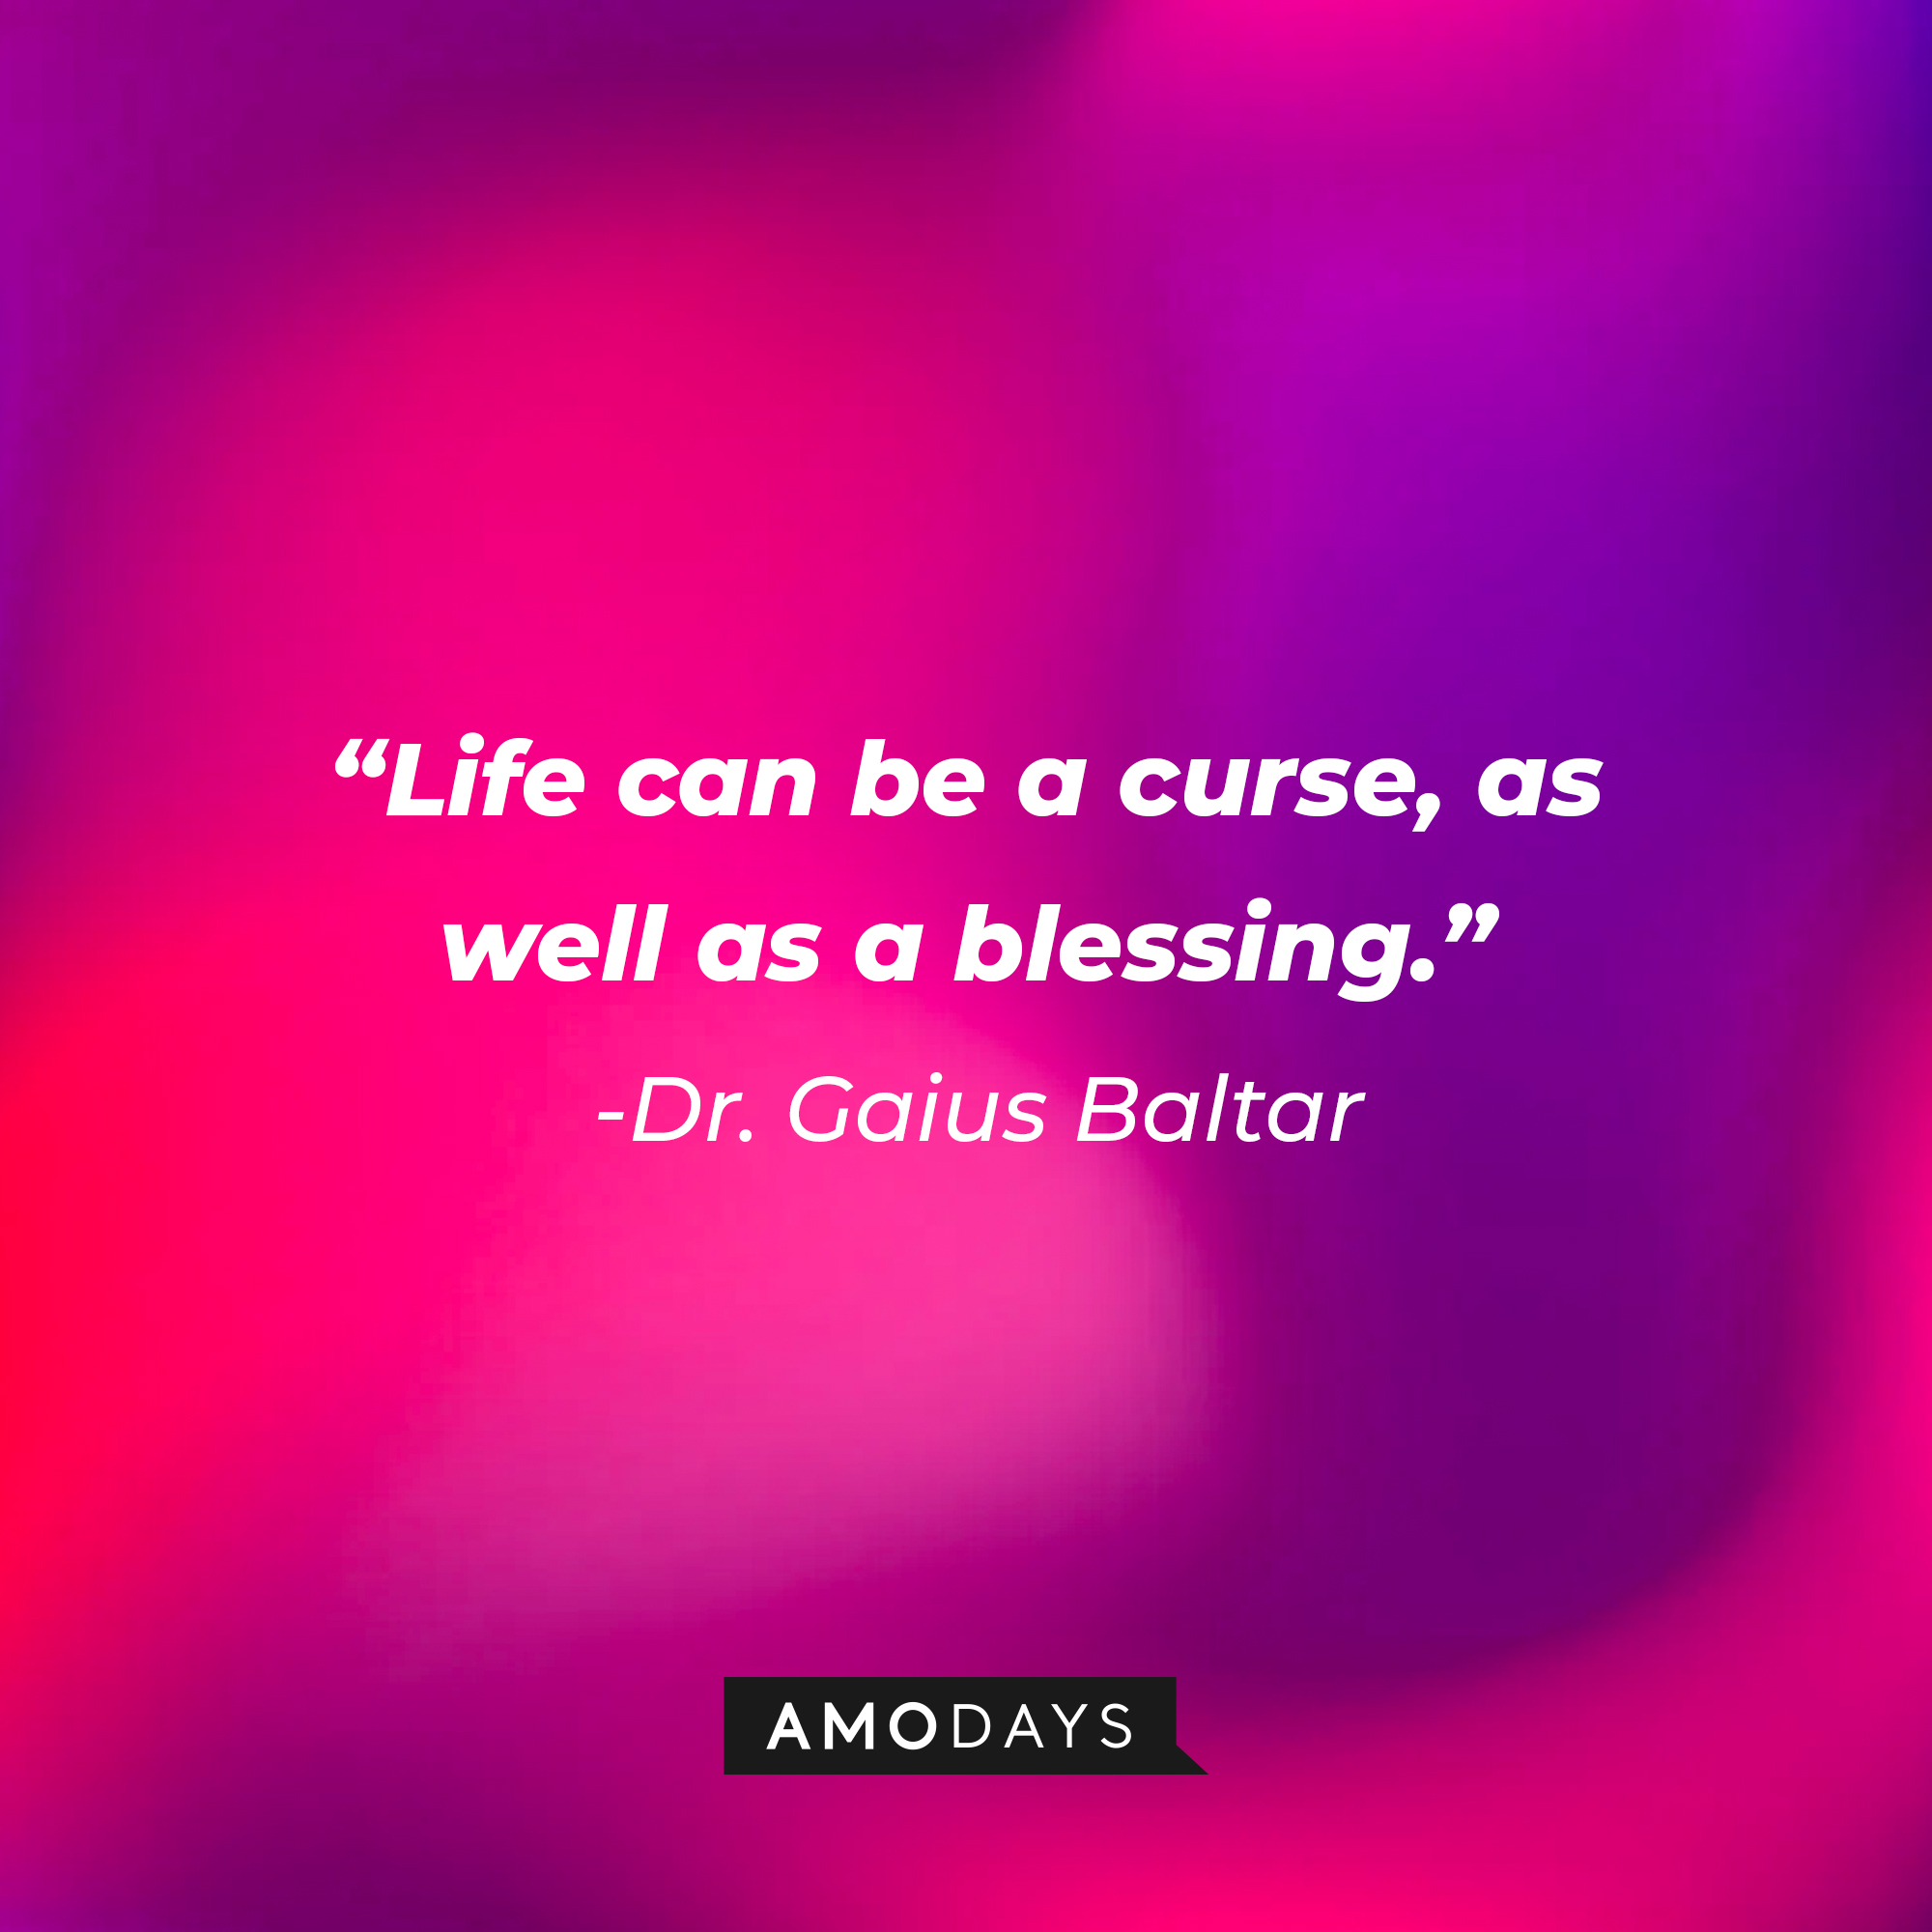 Chief Galen Tyrol’s quote: “Life can be a curse, as well as a blessing.” | Source: AmoDays